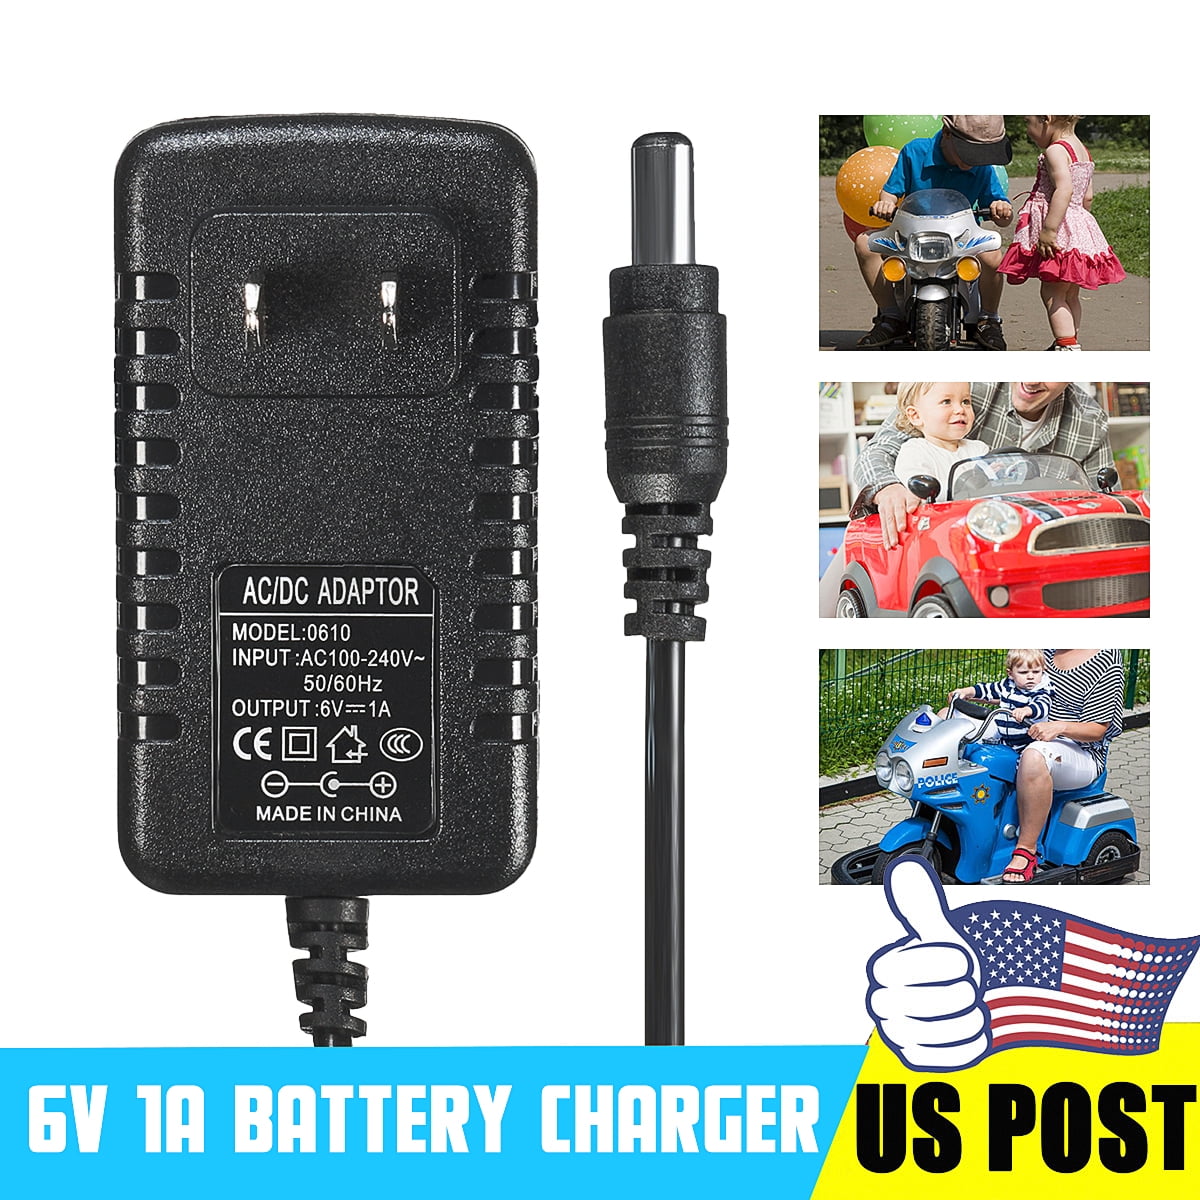 AC DC 6V 1A Battery Charger Adapter For Kids ATV Quad Ride On Car 